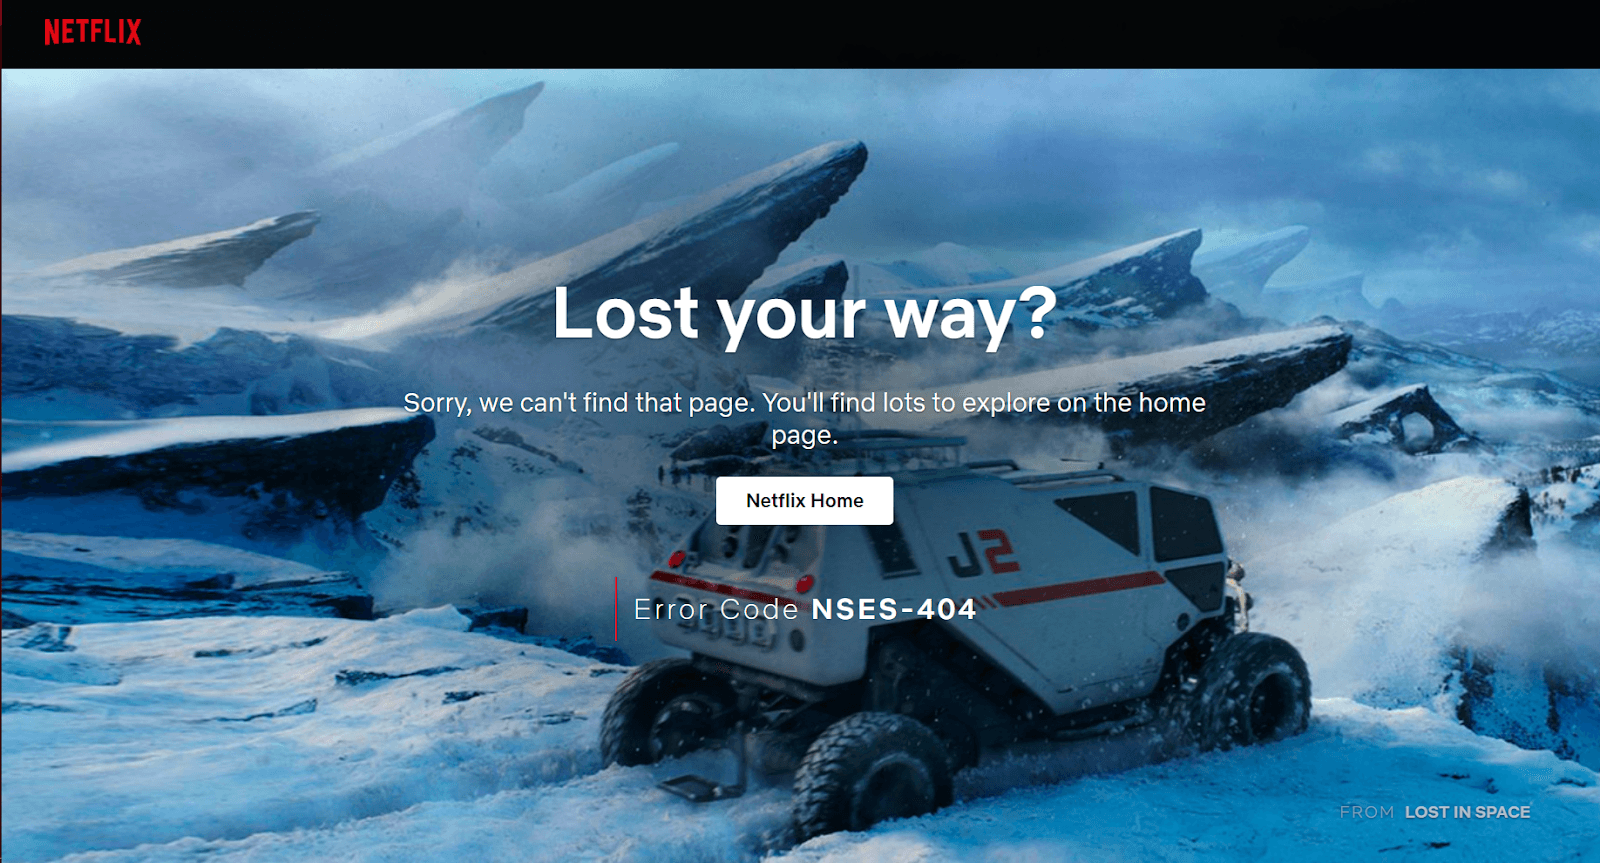 Netflix's 404 pop-up page, prompting users to return to the main page. "You'll find lots to explore on the home page", it reads, with a snapshot of a space rover, from the film "Lost in Space".